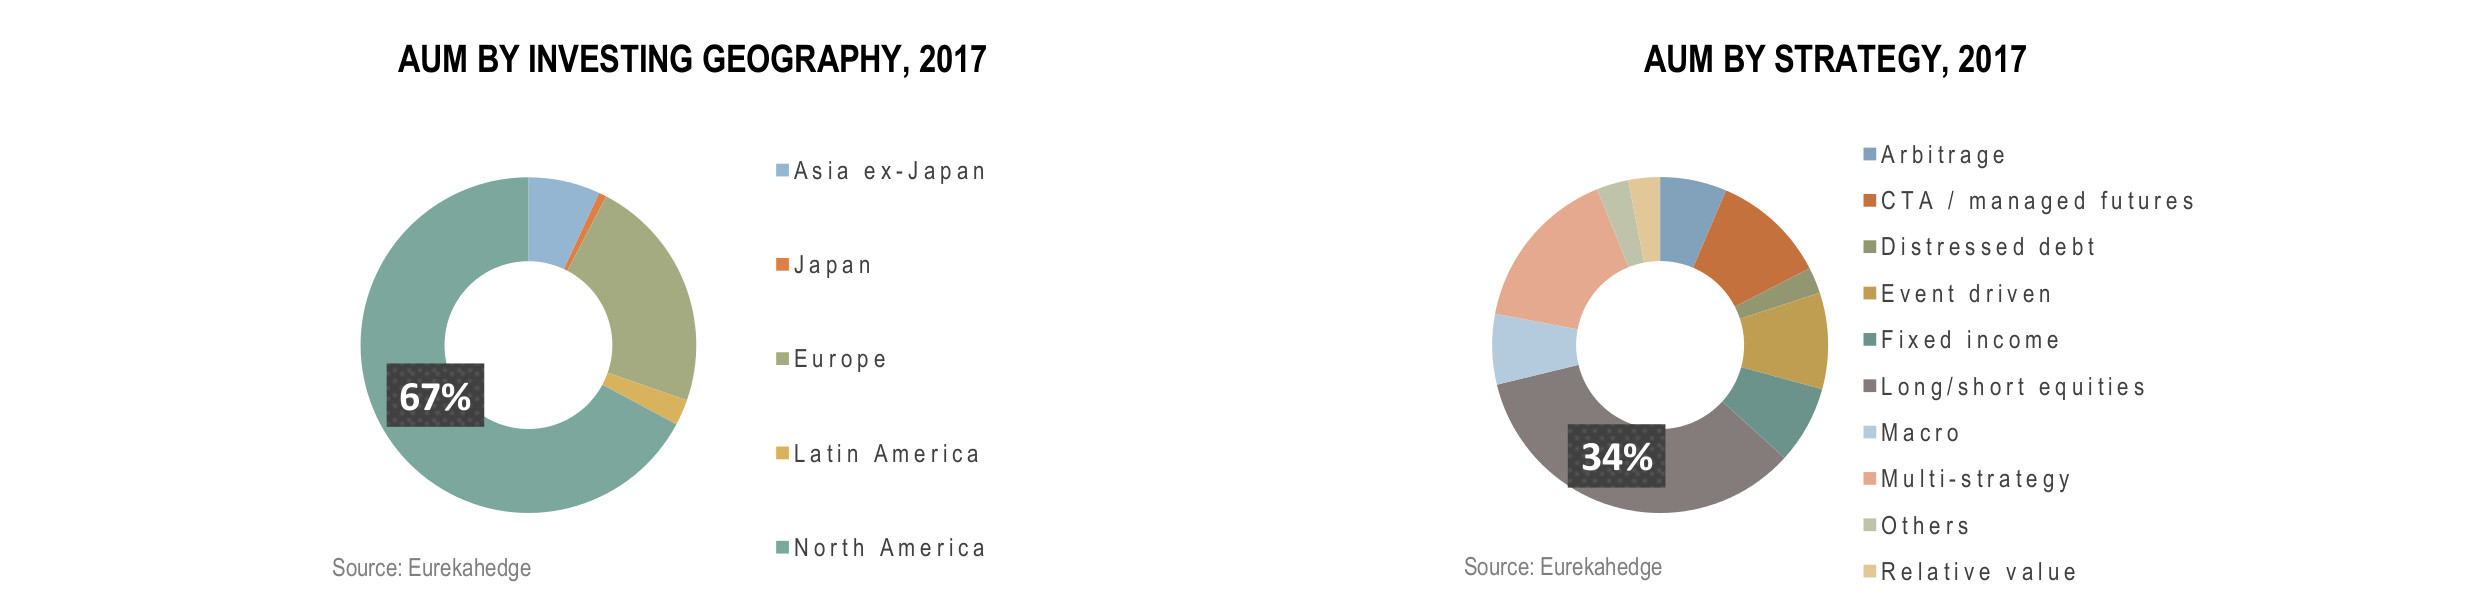 Global Hedge Fund Infographic August 2017 - AUM by investing geography and strategy